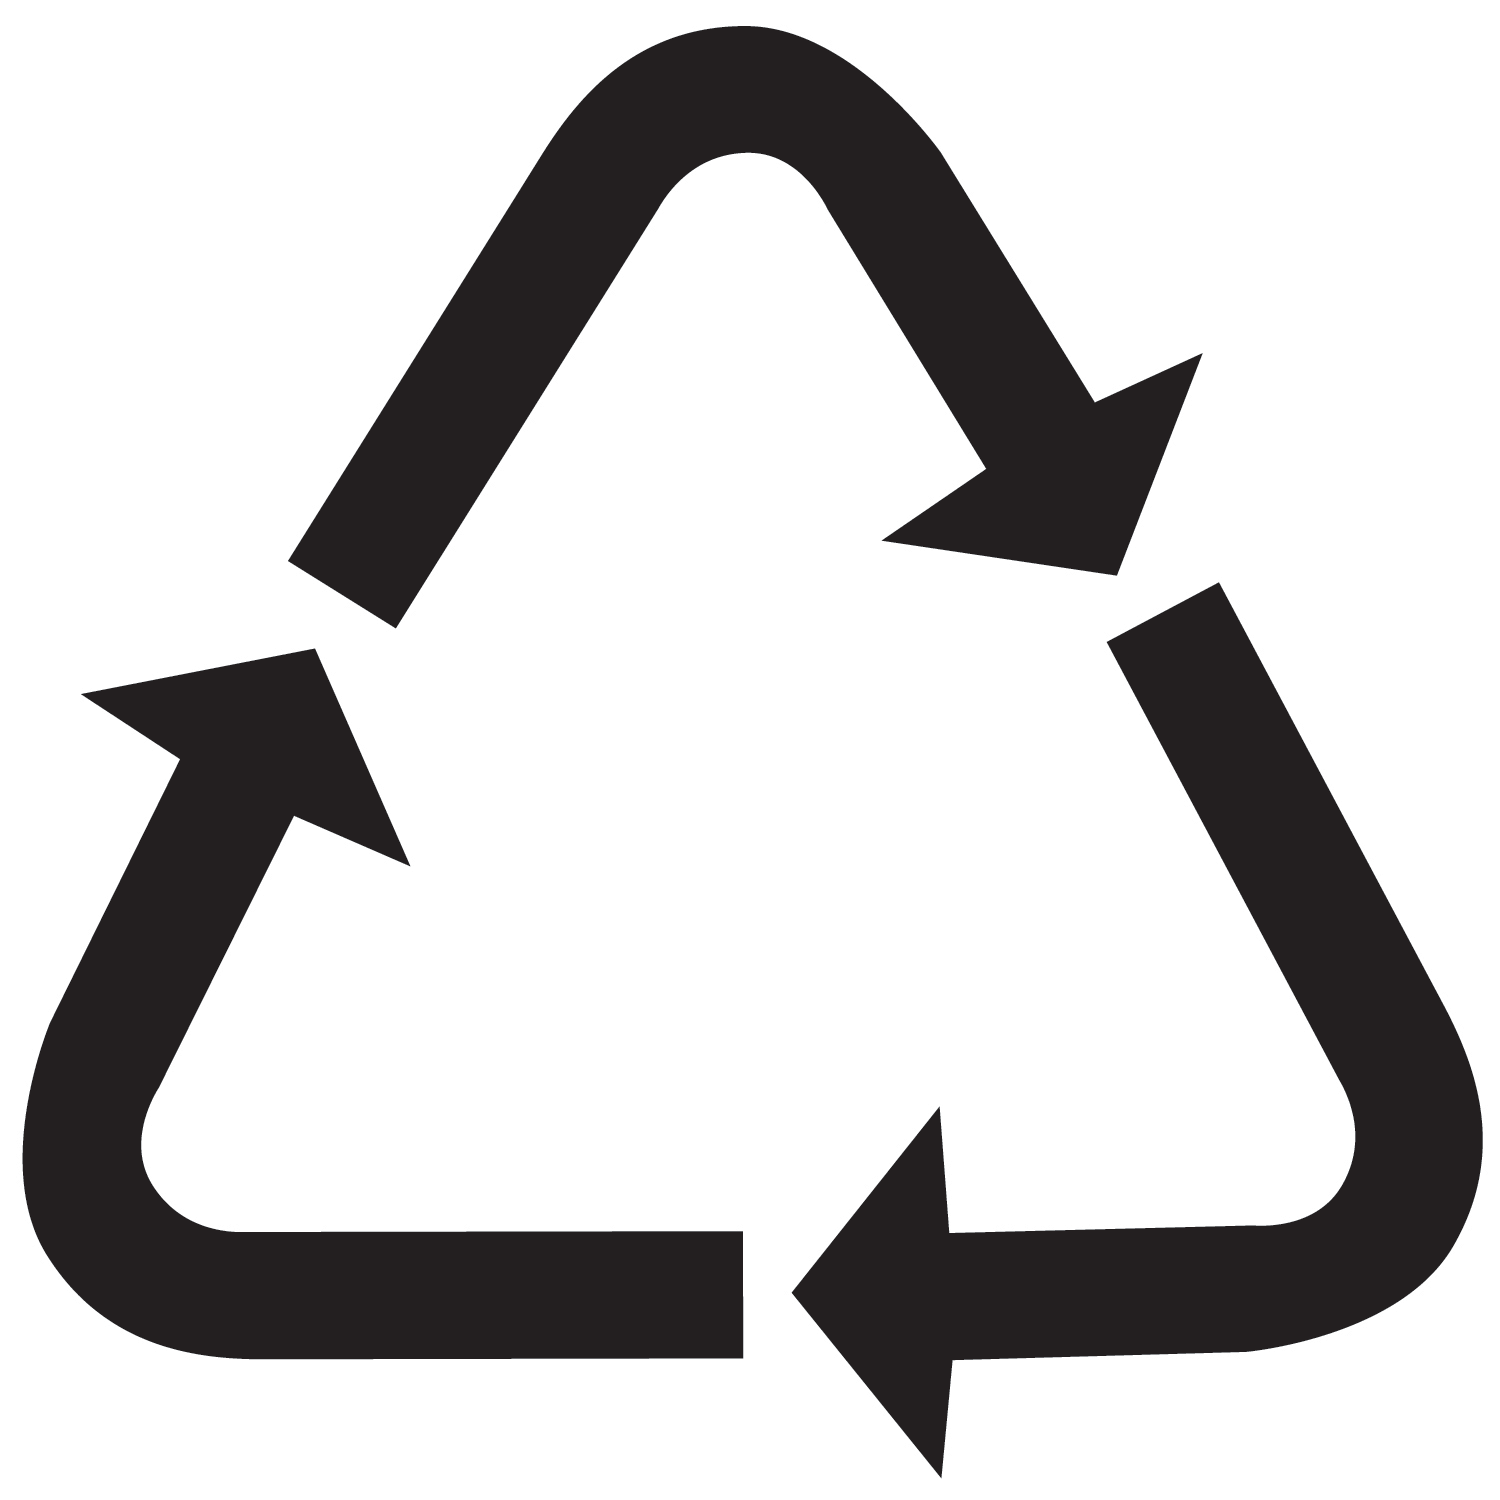 Please Recycle Logo - Free Recycling Sign, Download Free Clip Art, Free Clip Art on ...